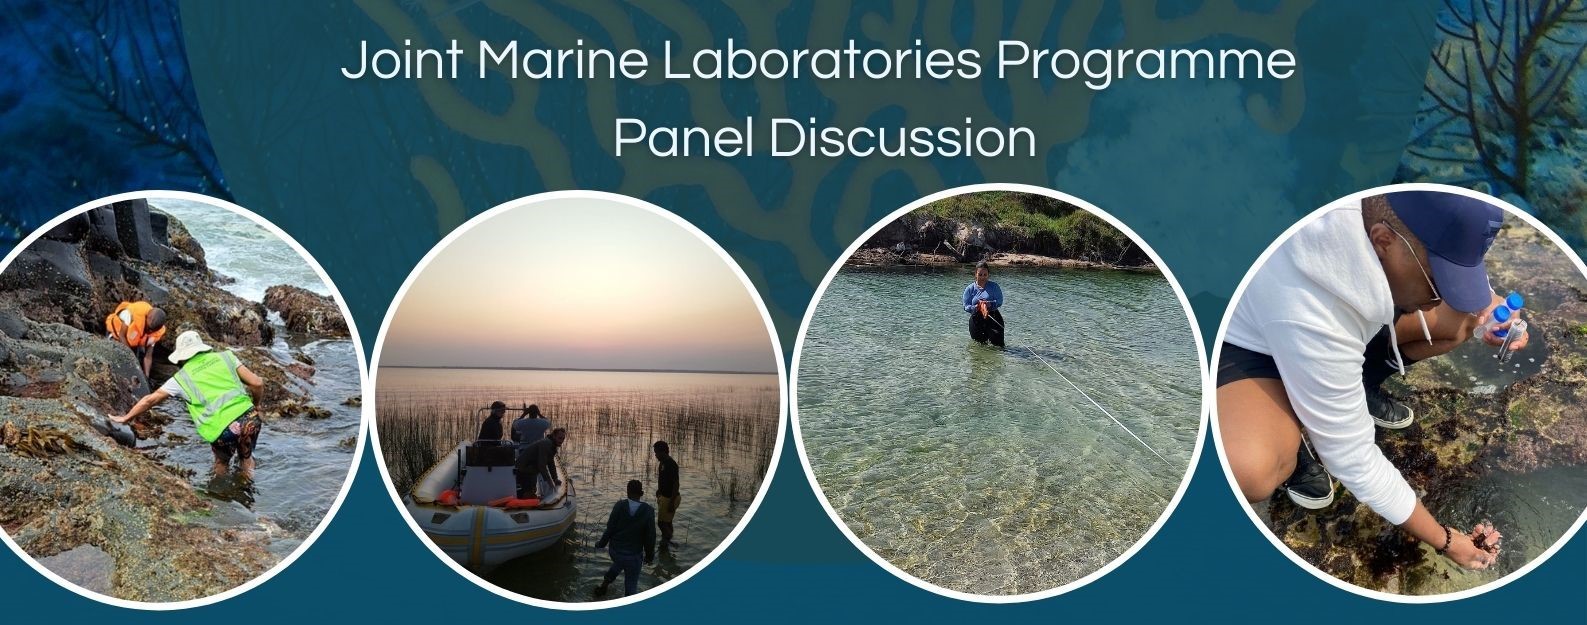 Panel Discussion: Changing the tides in Ocean research, through innovation, research and partnerships